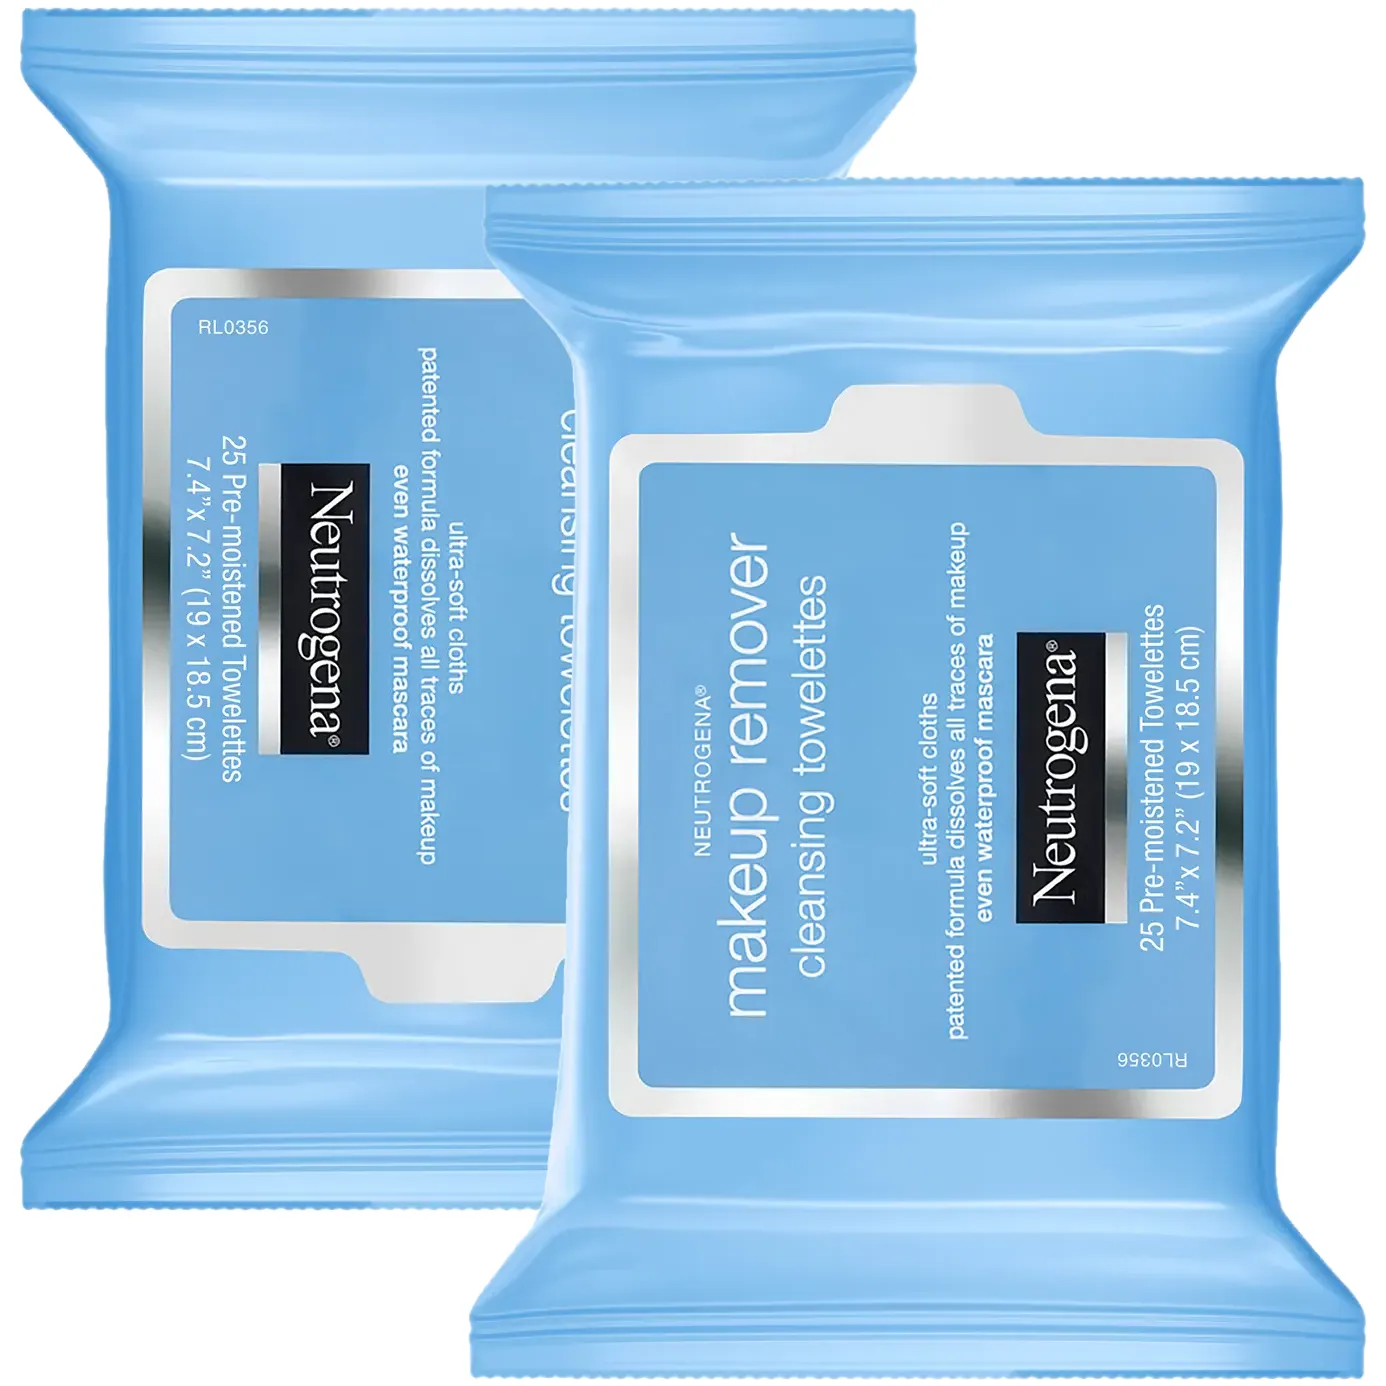 Free Neutrogena Makeup Remover Cleansing Towelette